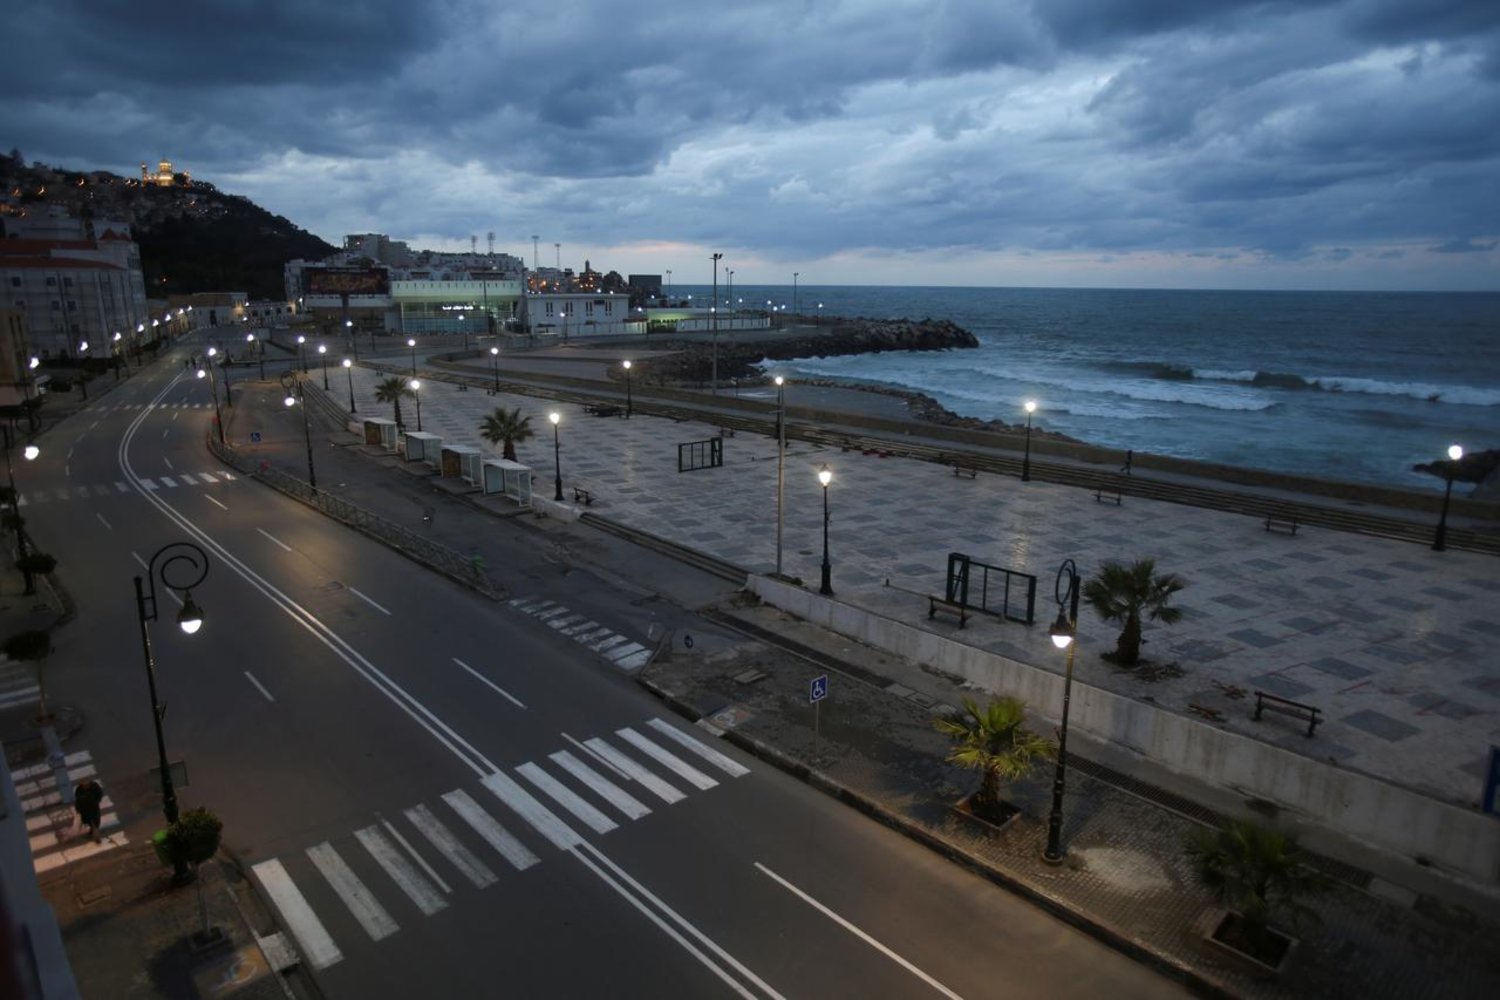 A general view shows an empty street after a curfew was imposed to prevent the spread of the coronavirus, in Algiers, Algeria March 25, 2020. (Reuters)